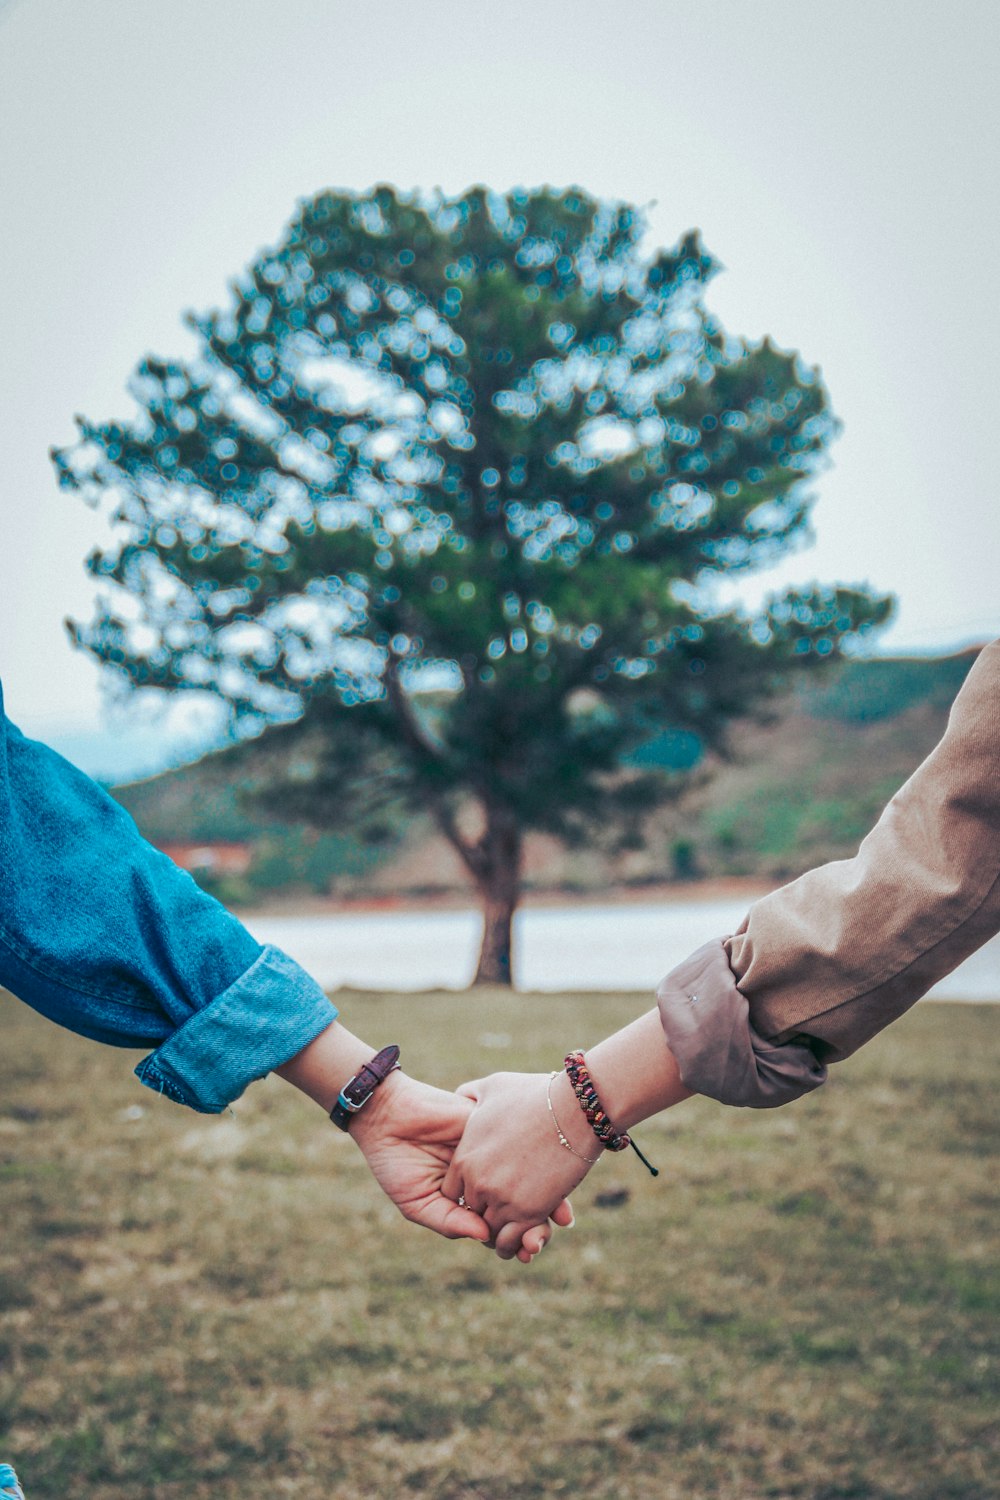 100 Couple Holding Hands Pictures Download Free Images On Unsplash Romantic instagram captions for couples who have that loving feeling. 100 couple holding hands pictures